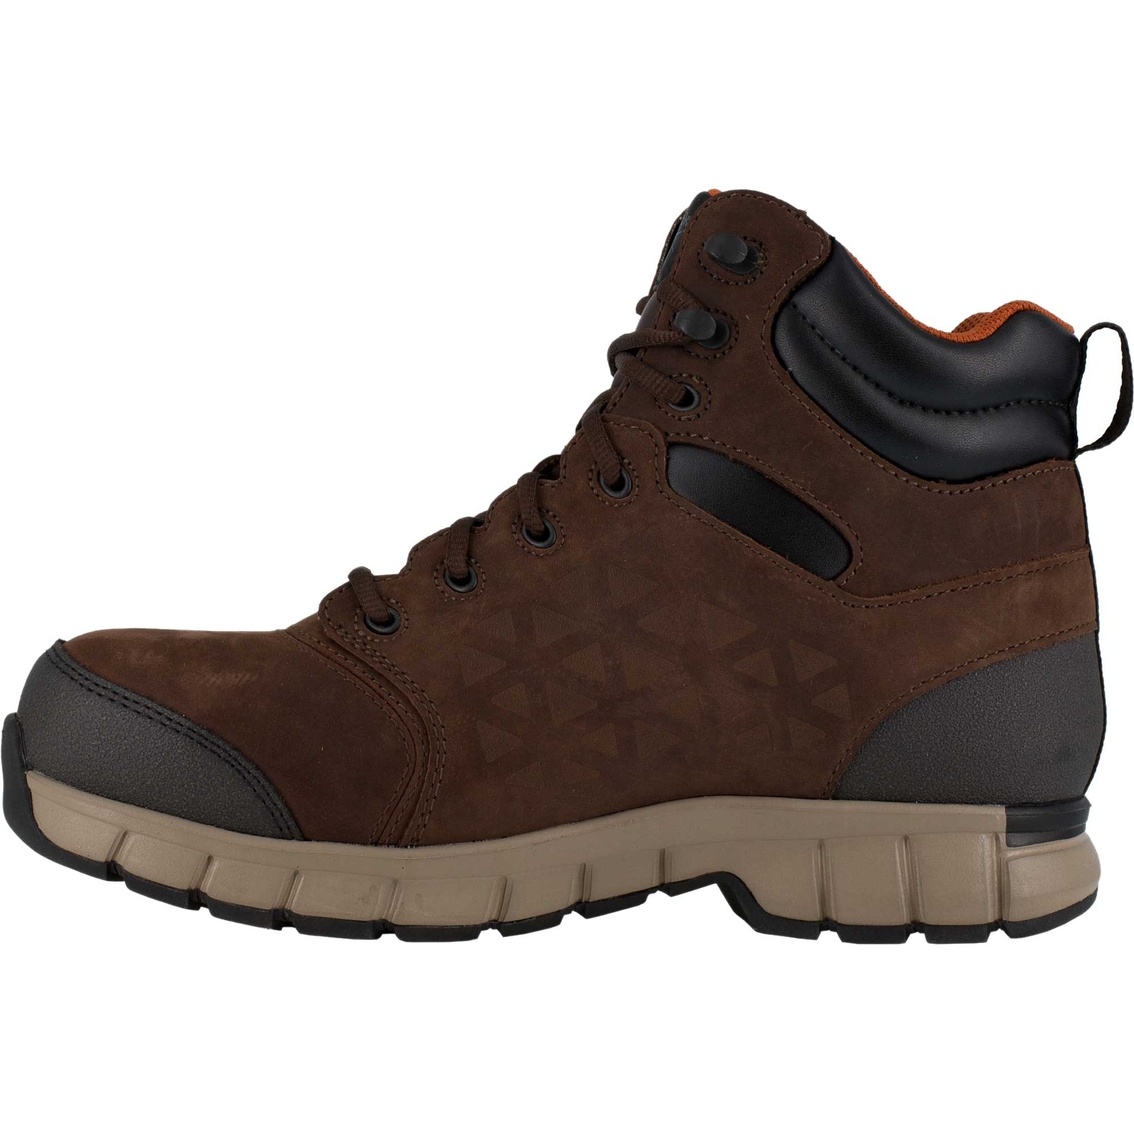 Reebok Sublite Cushion Work Boots | Boots | Military | Shop The Exchange